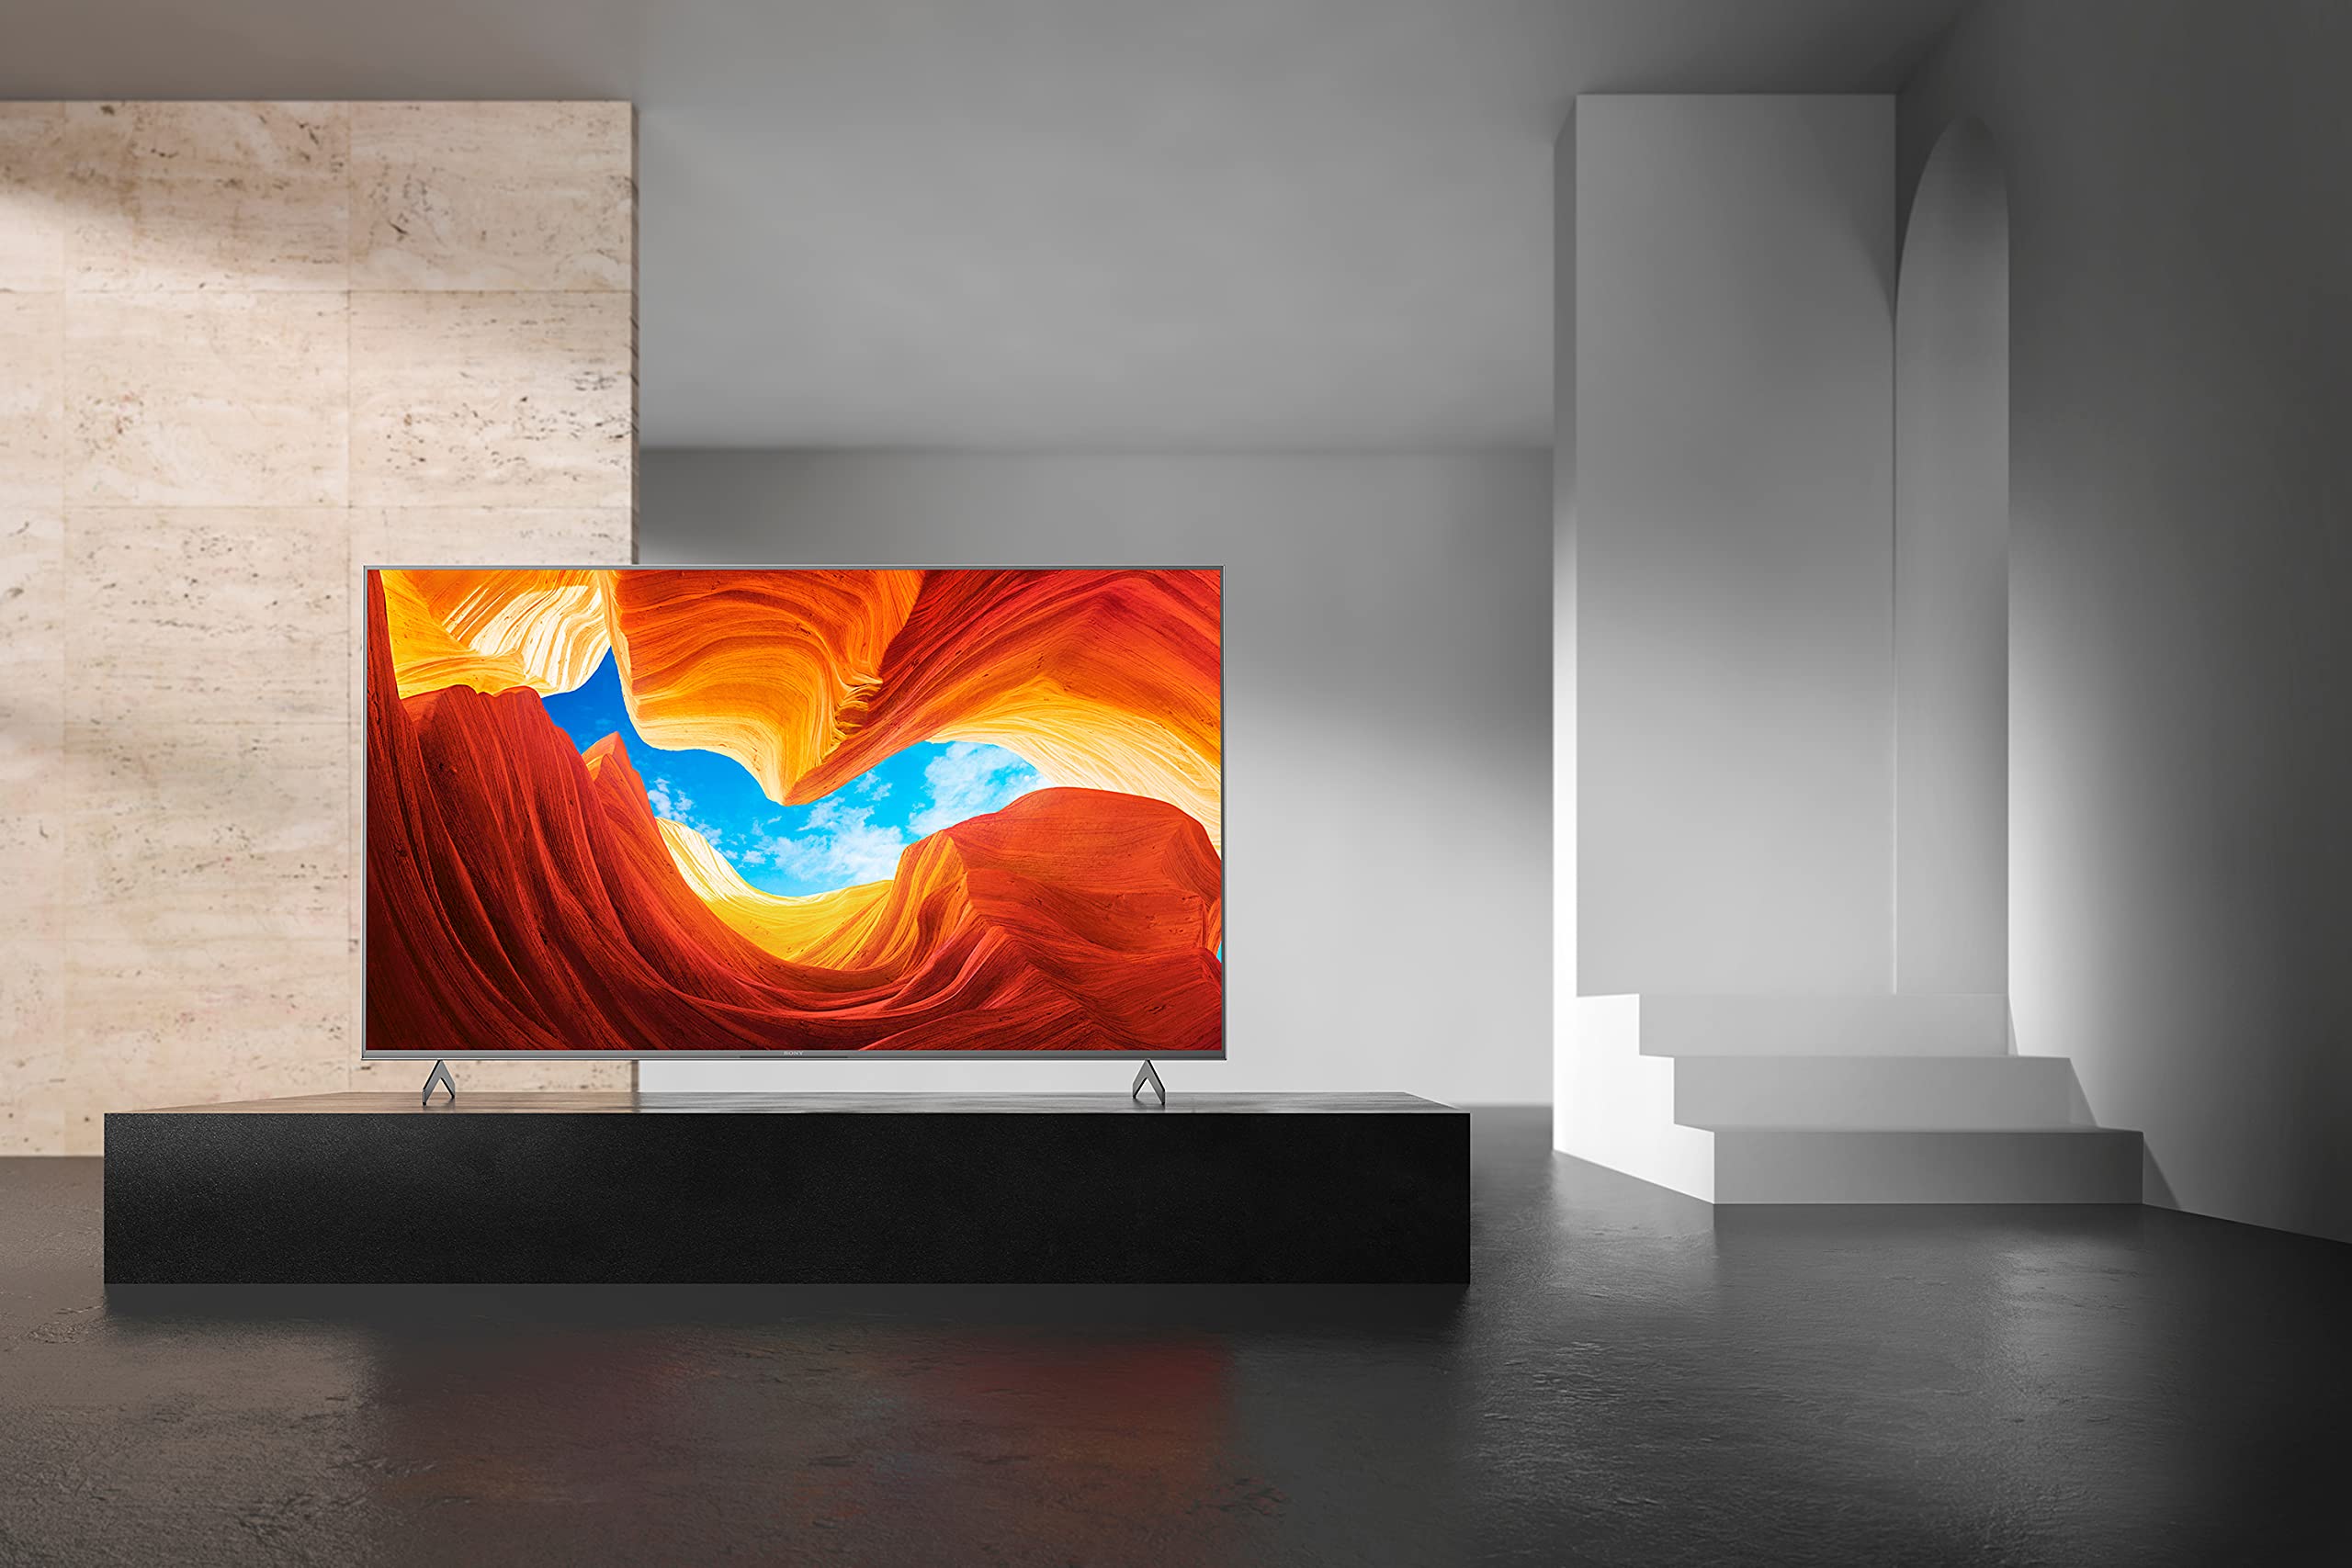 Sony X900H 55-inch TV: 4K Ultra HD Smart LED TV with HDR, Game Mode for Gaming, and Alexa Compatibility - 2020 Model